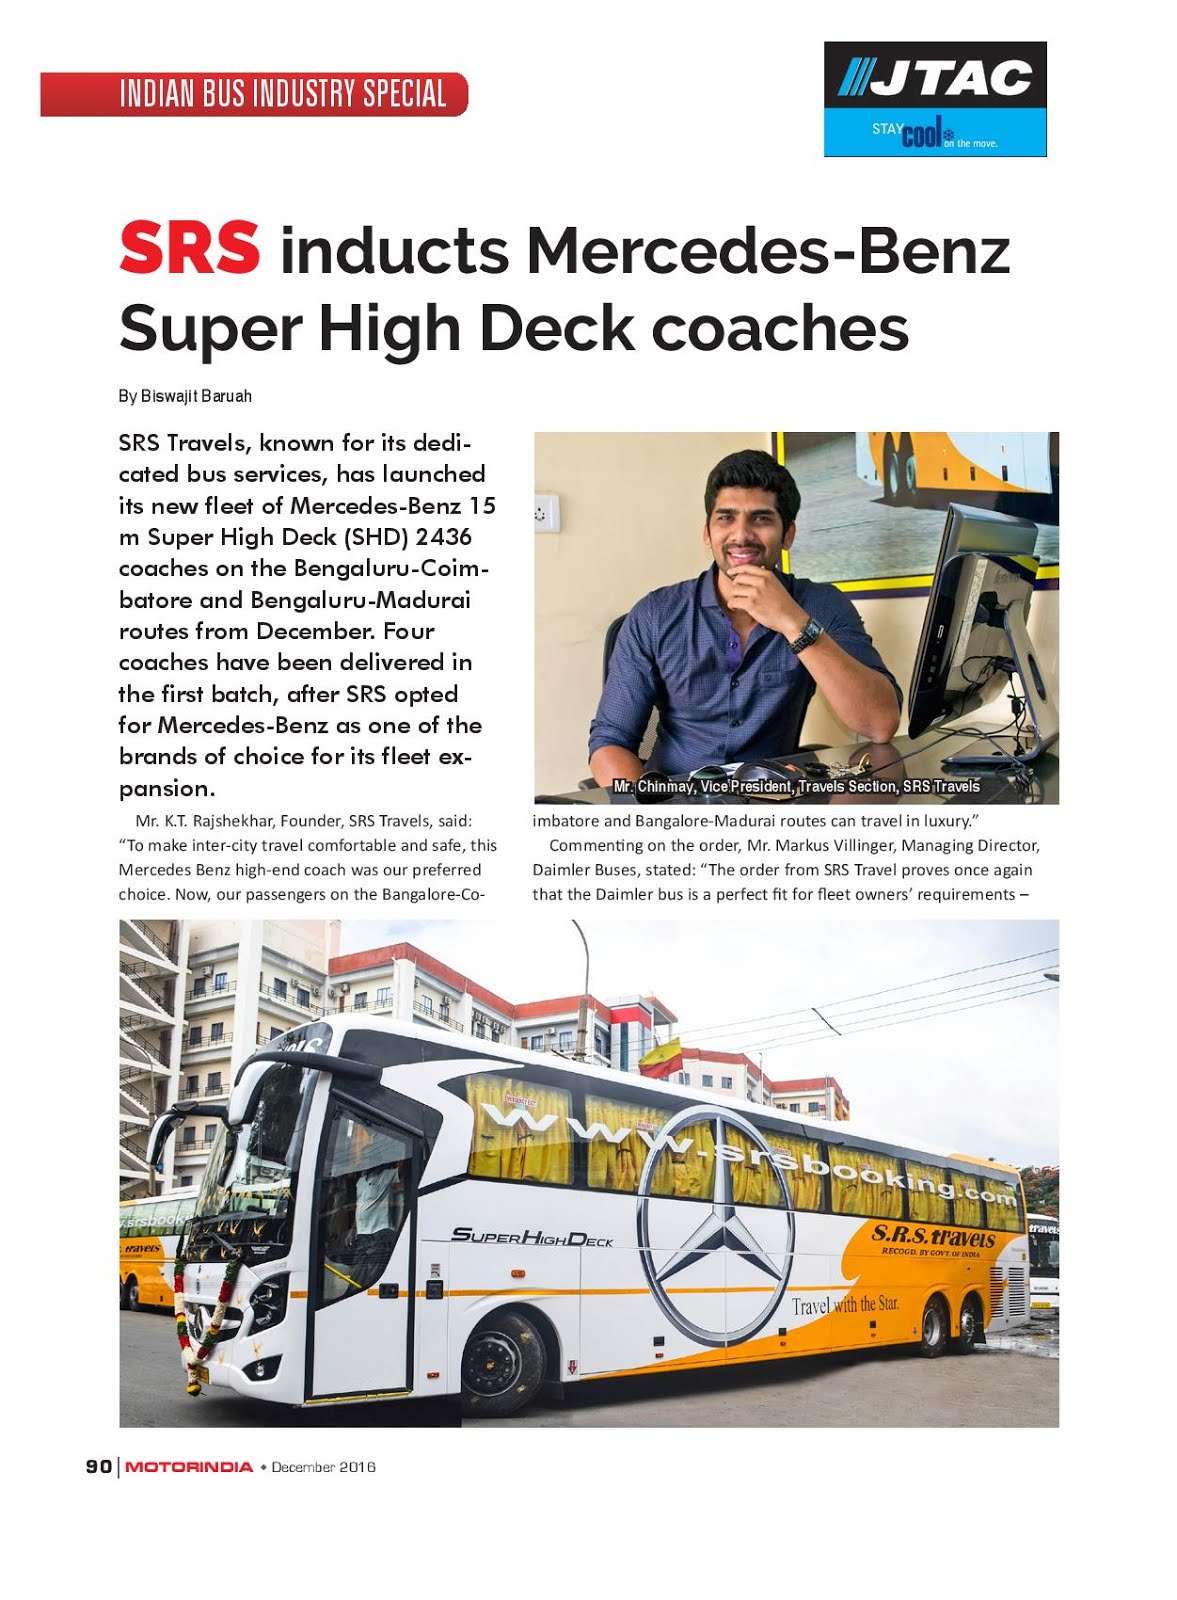 MOTOR INDIA ARTICLE 8 : SRS TRAVELS